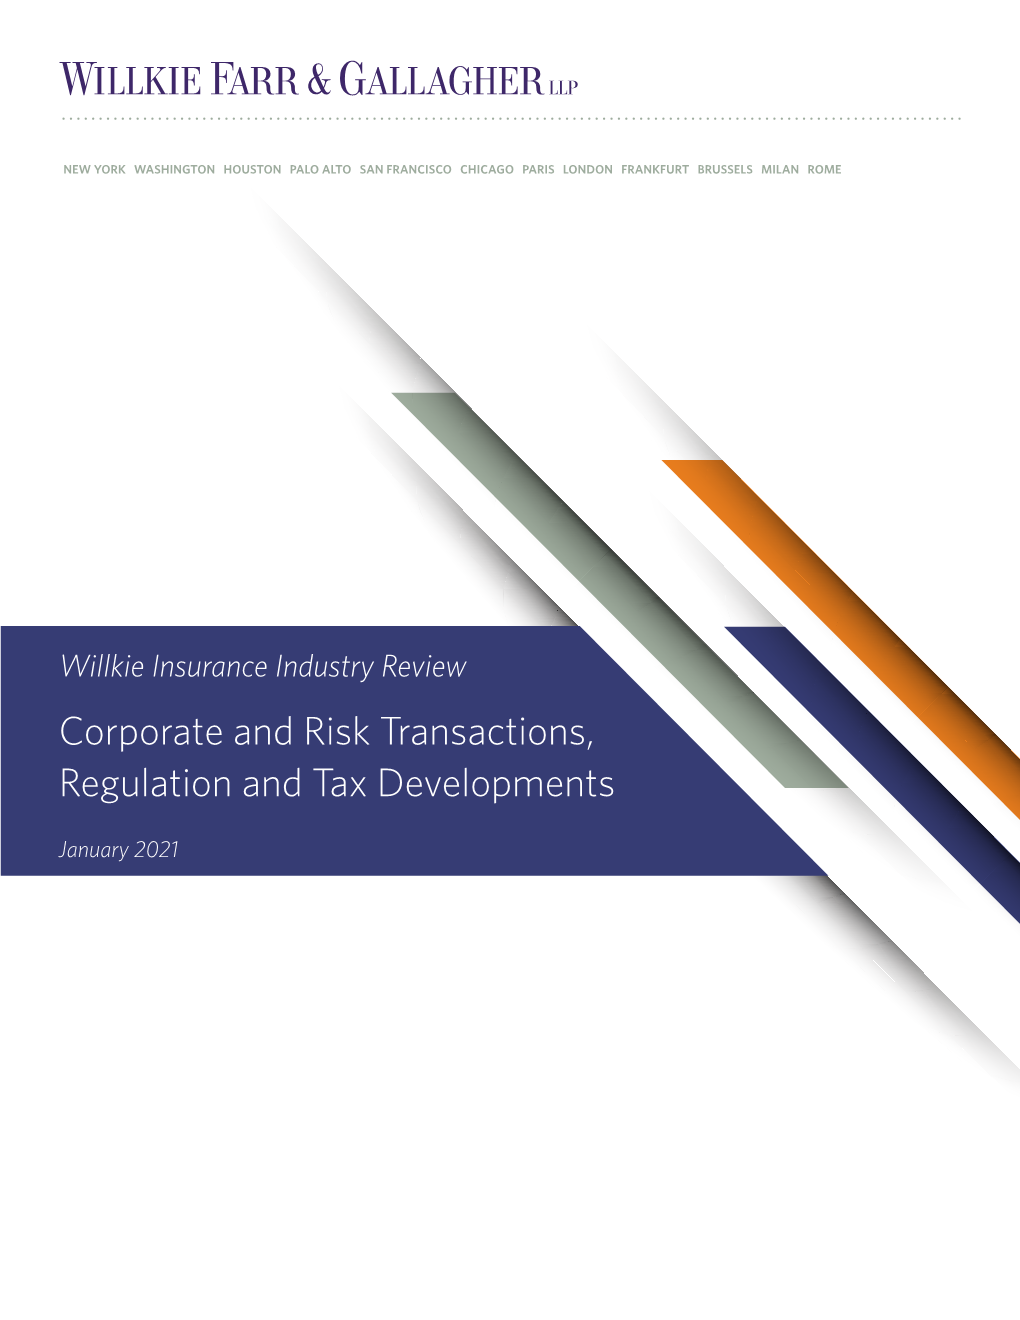 Willkie Insurance Industry Review Corporate and Risk Transactions, Regulation and Tax Developments